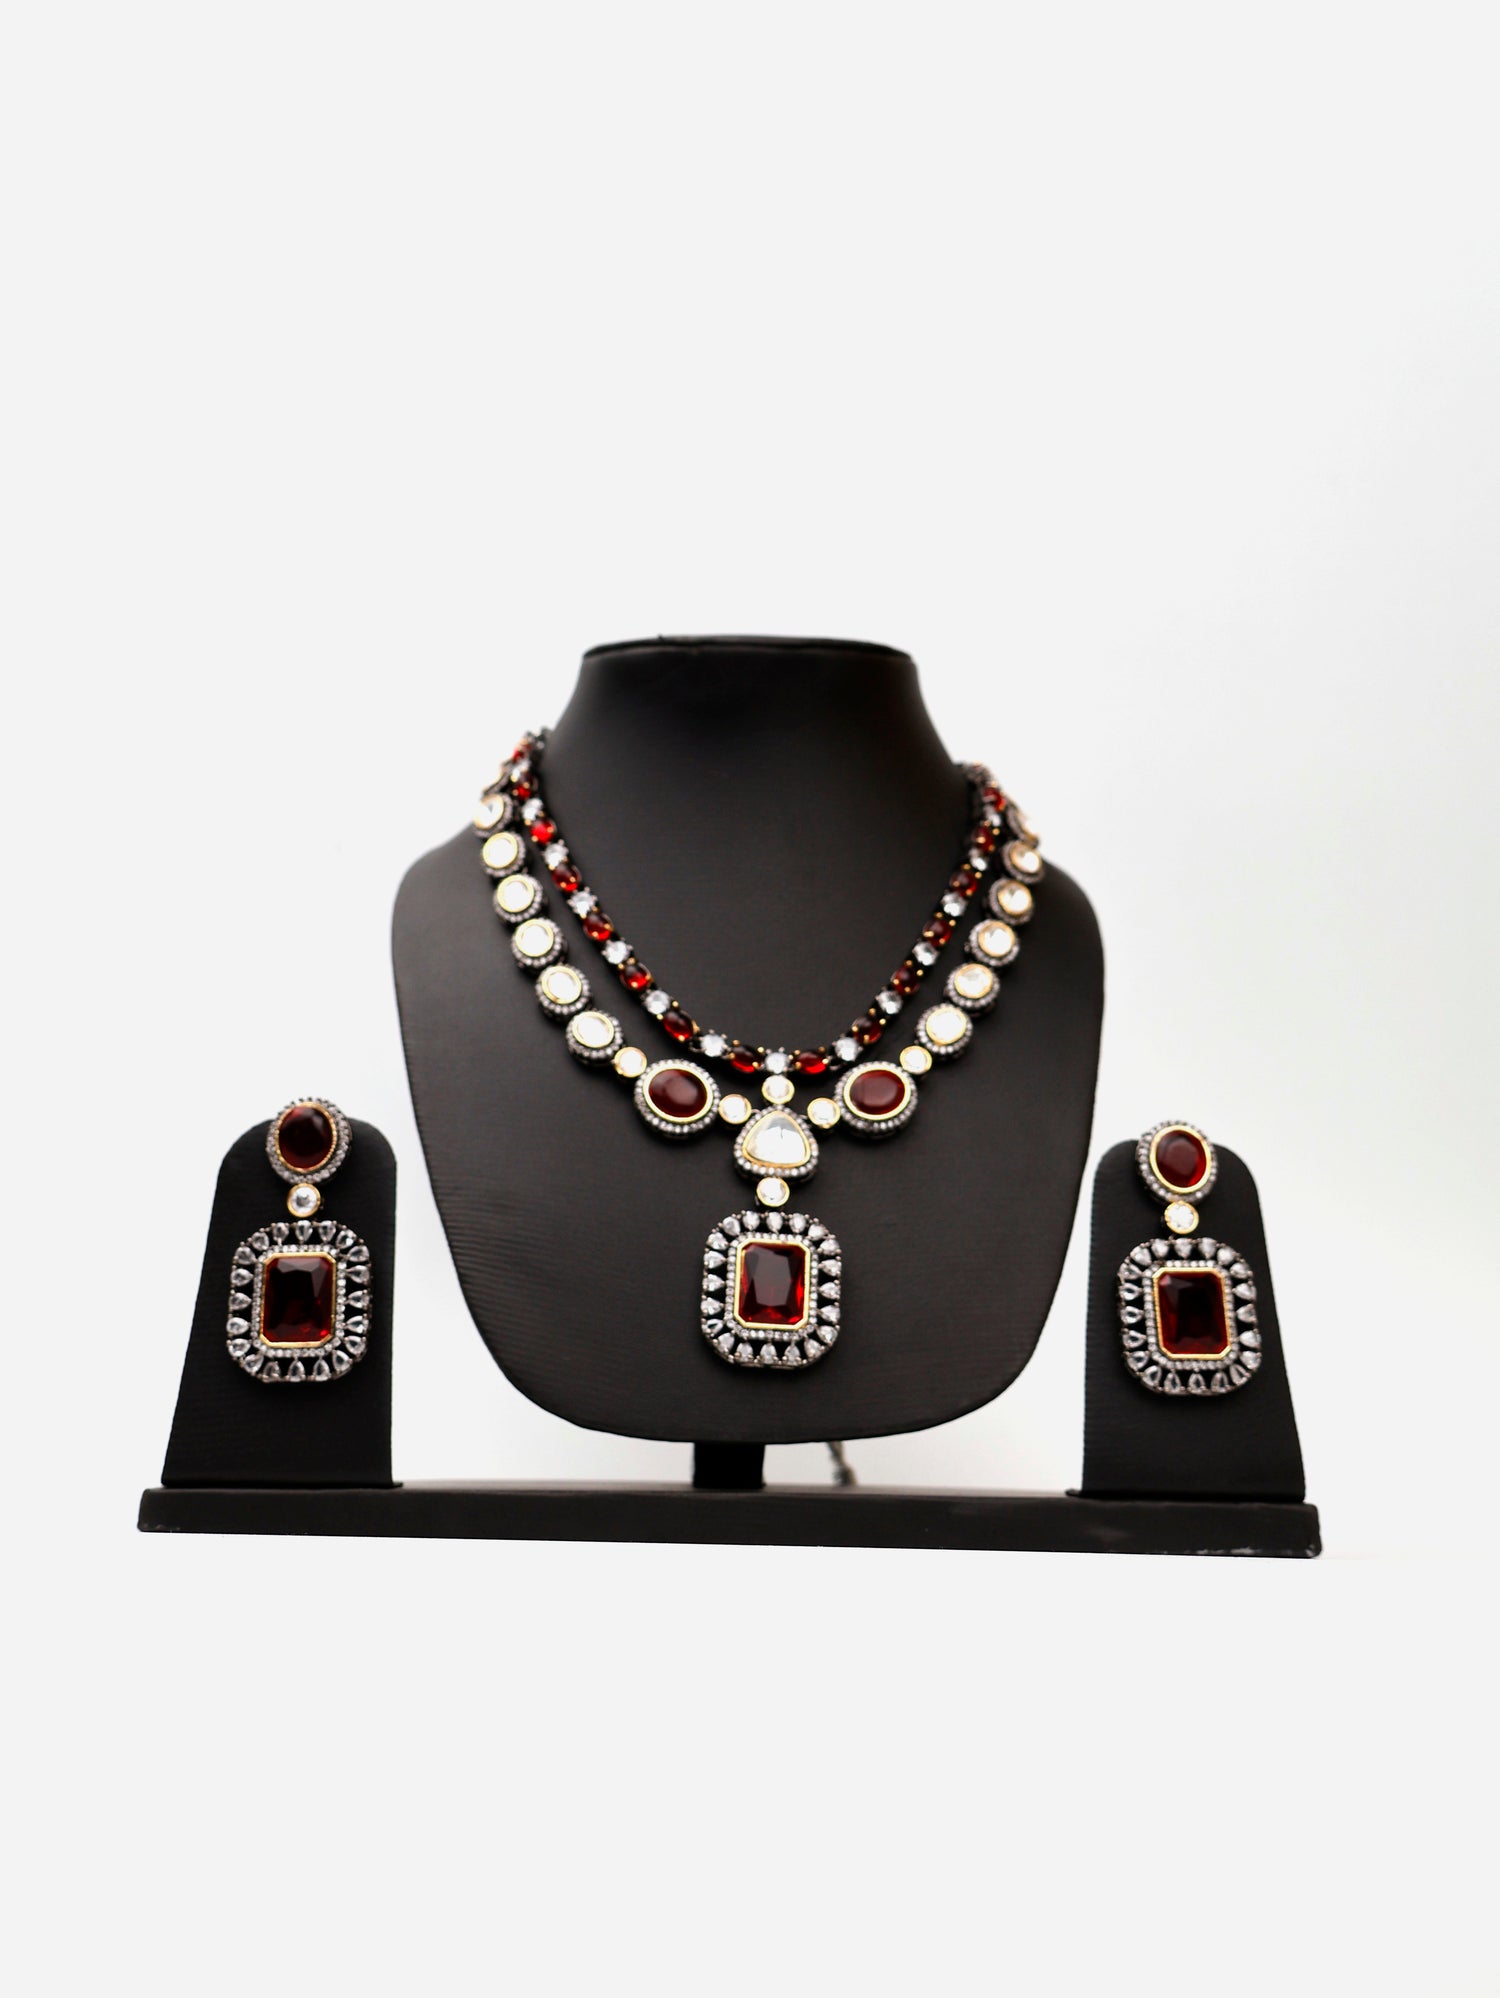 Red Garnet Stone and Kundan work Reverse AD Two Layer Necklace Set Fashion Jewelry for Party Festival Wedding Occasion in Noida